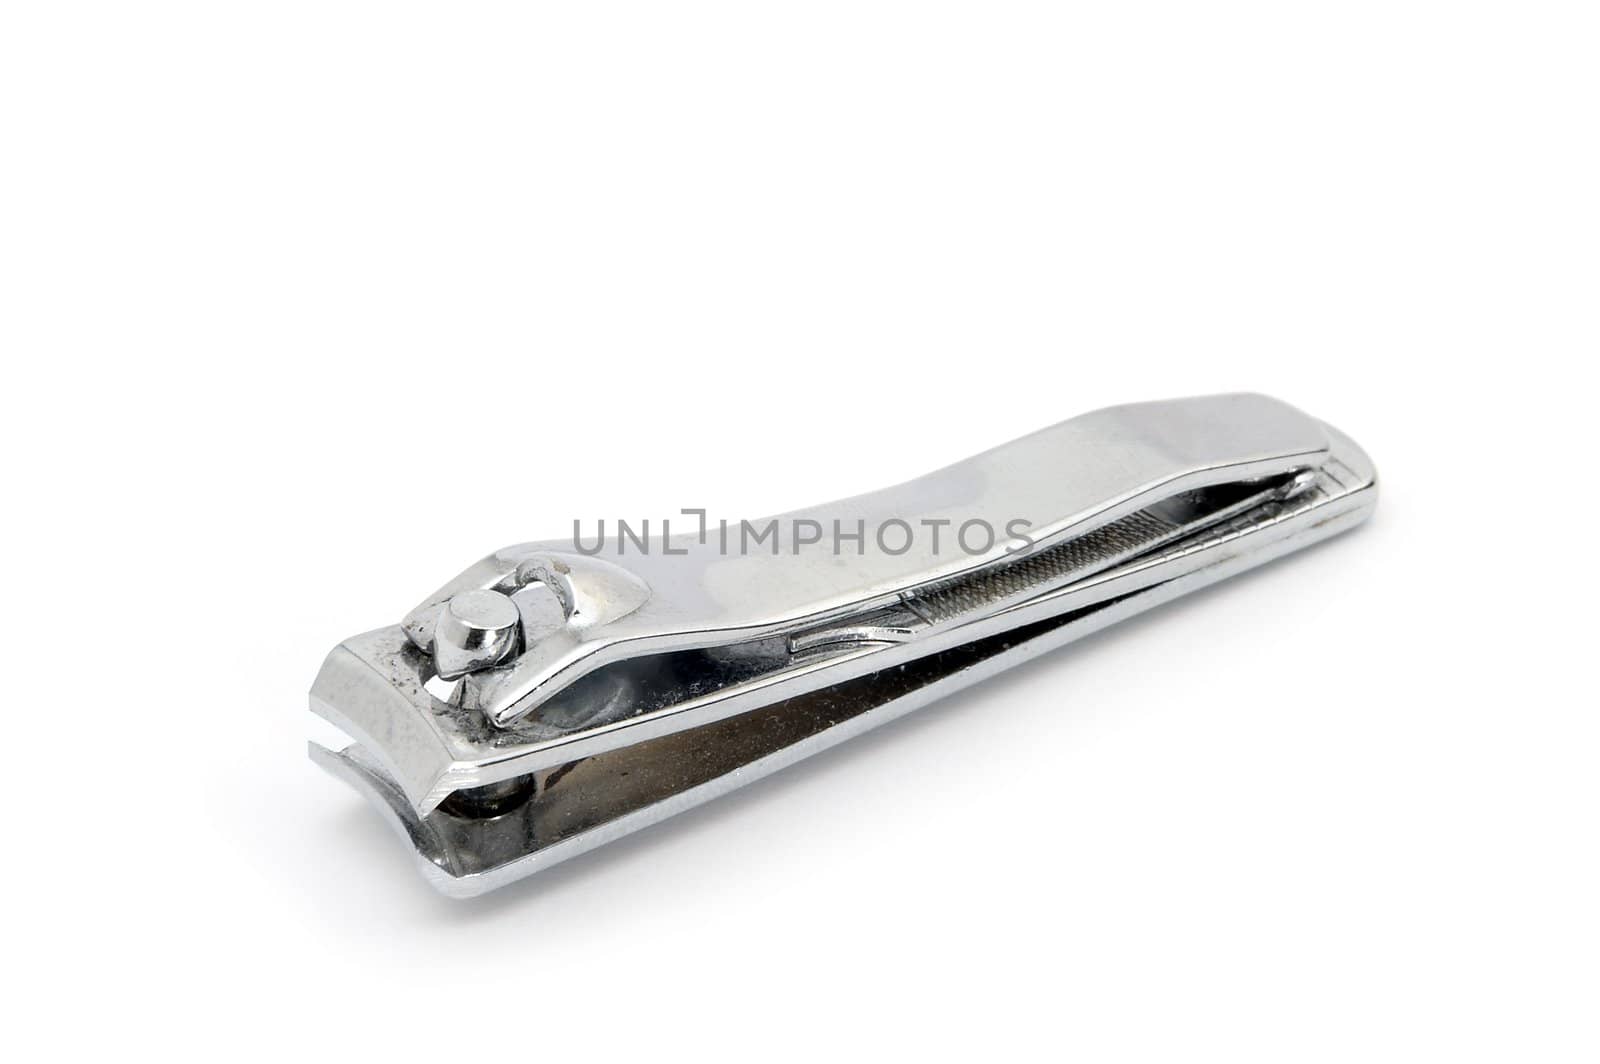 steel nail cutter isolated on white background